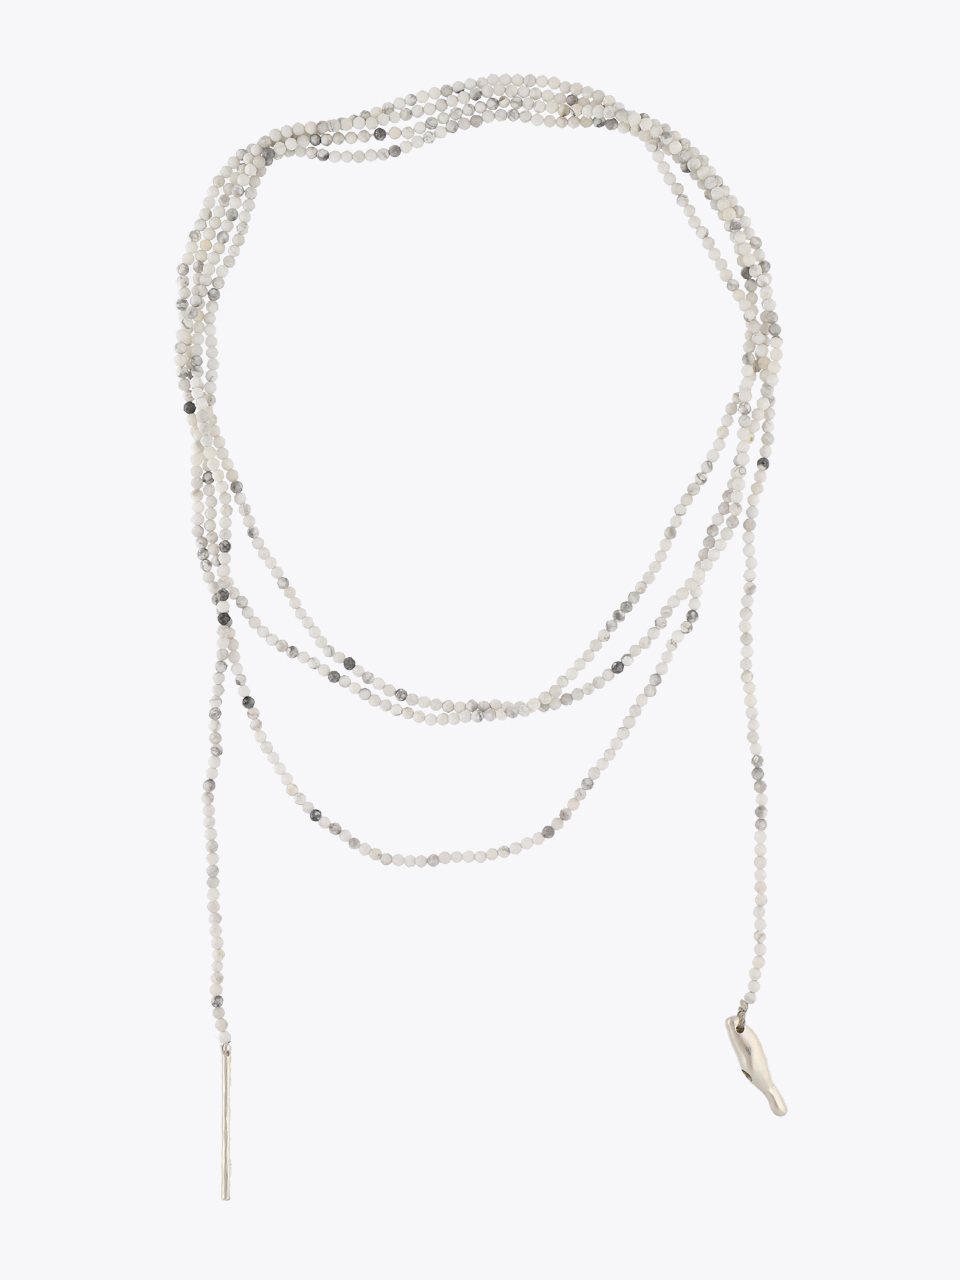 Stone scarf necklace - White